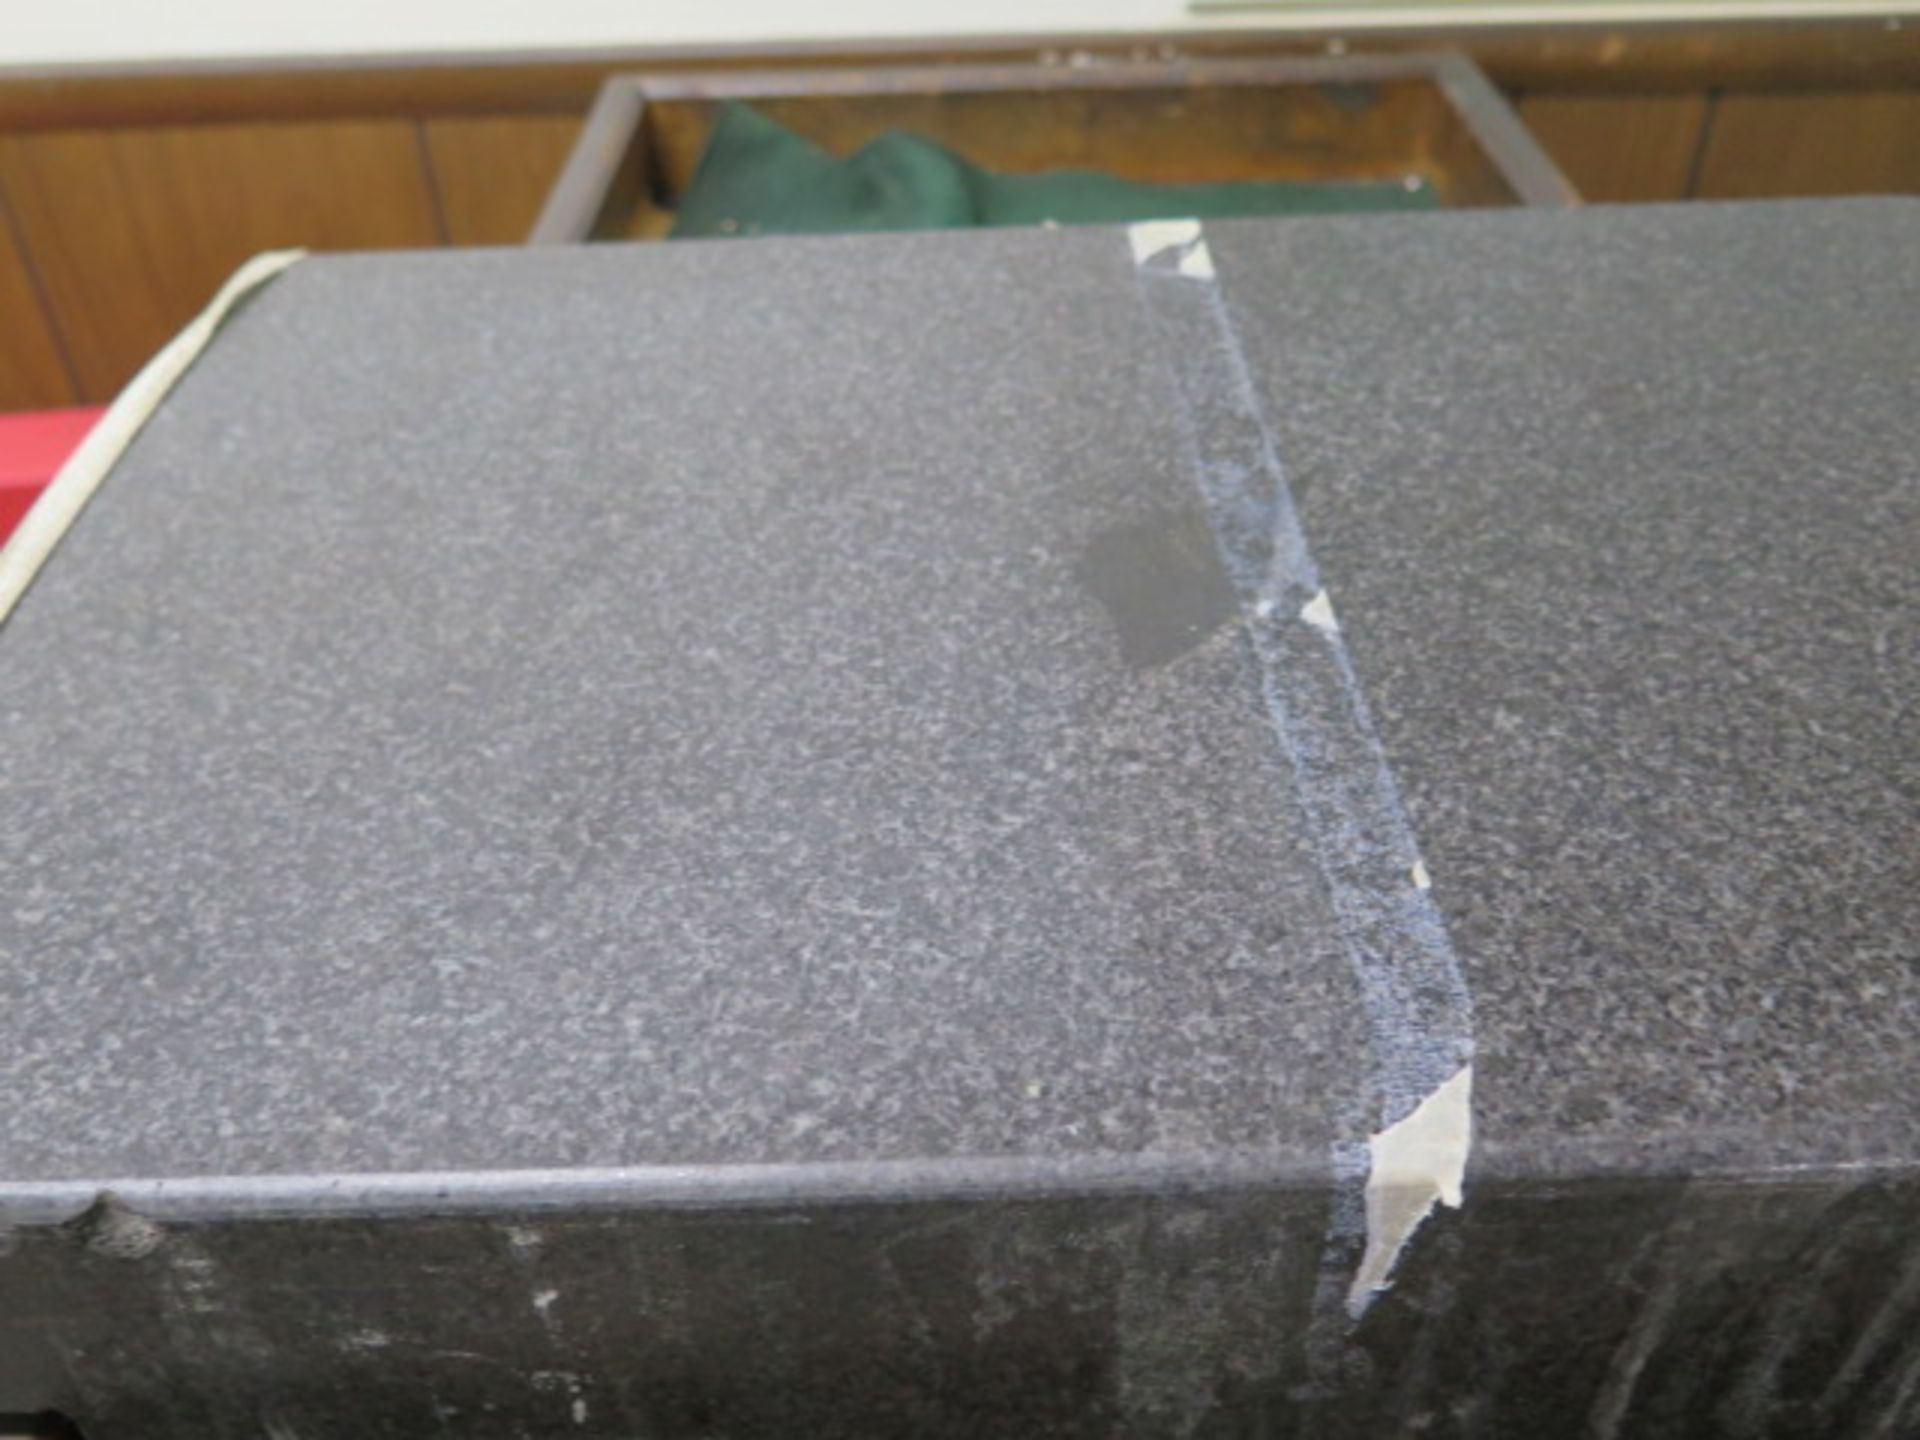 12" x 18" x 4" 2-Ledge Granite Surface Plate w/ Cart (SOLD AS-IS - NO WARRANTY) - Image 3 of 4